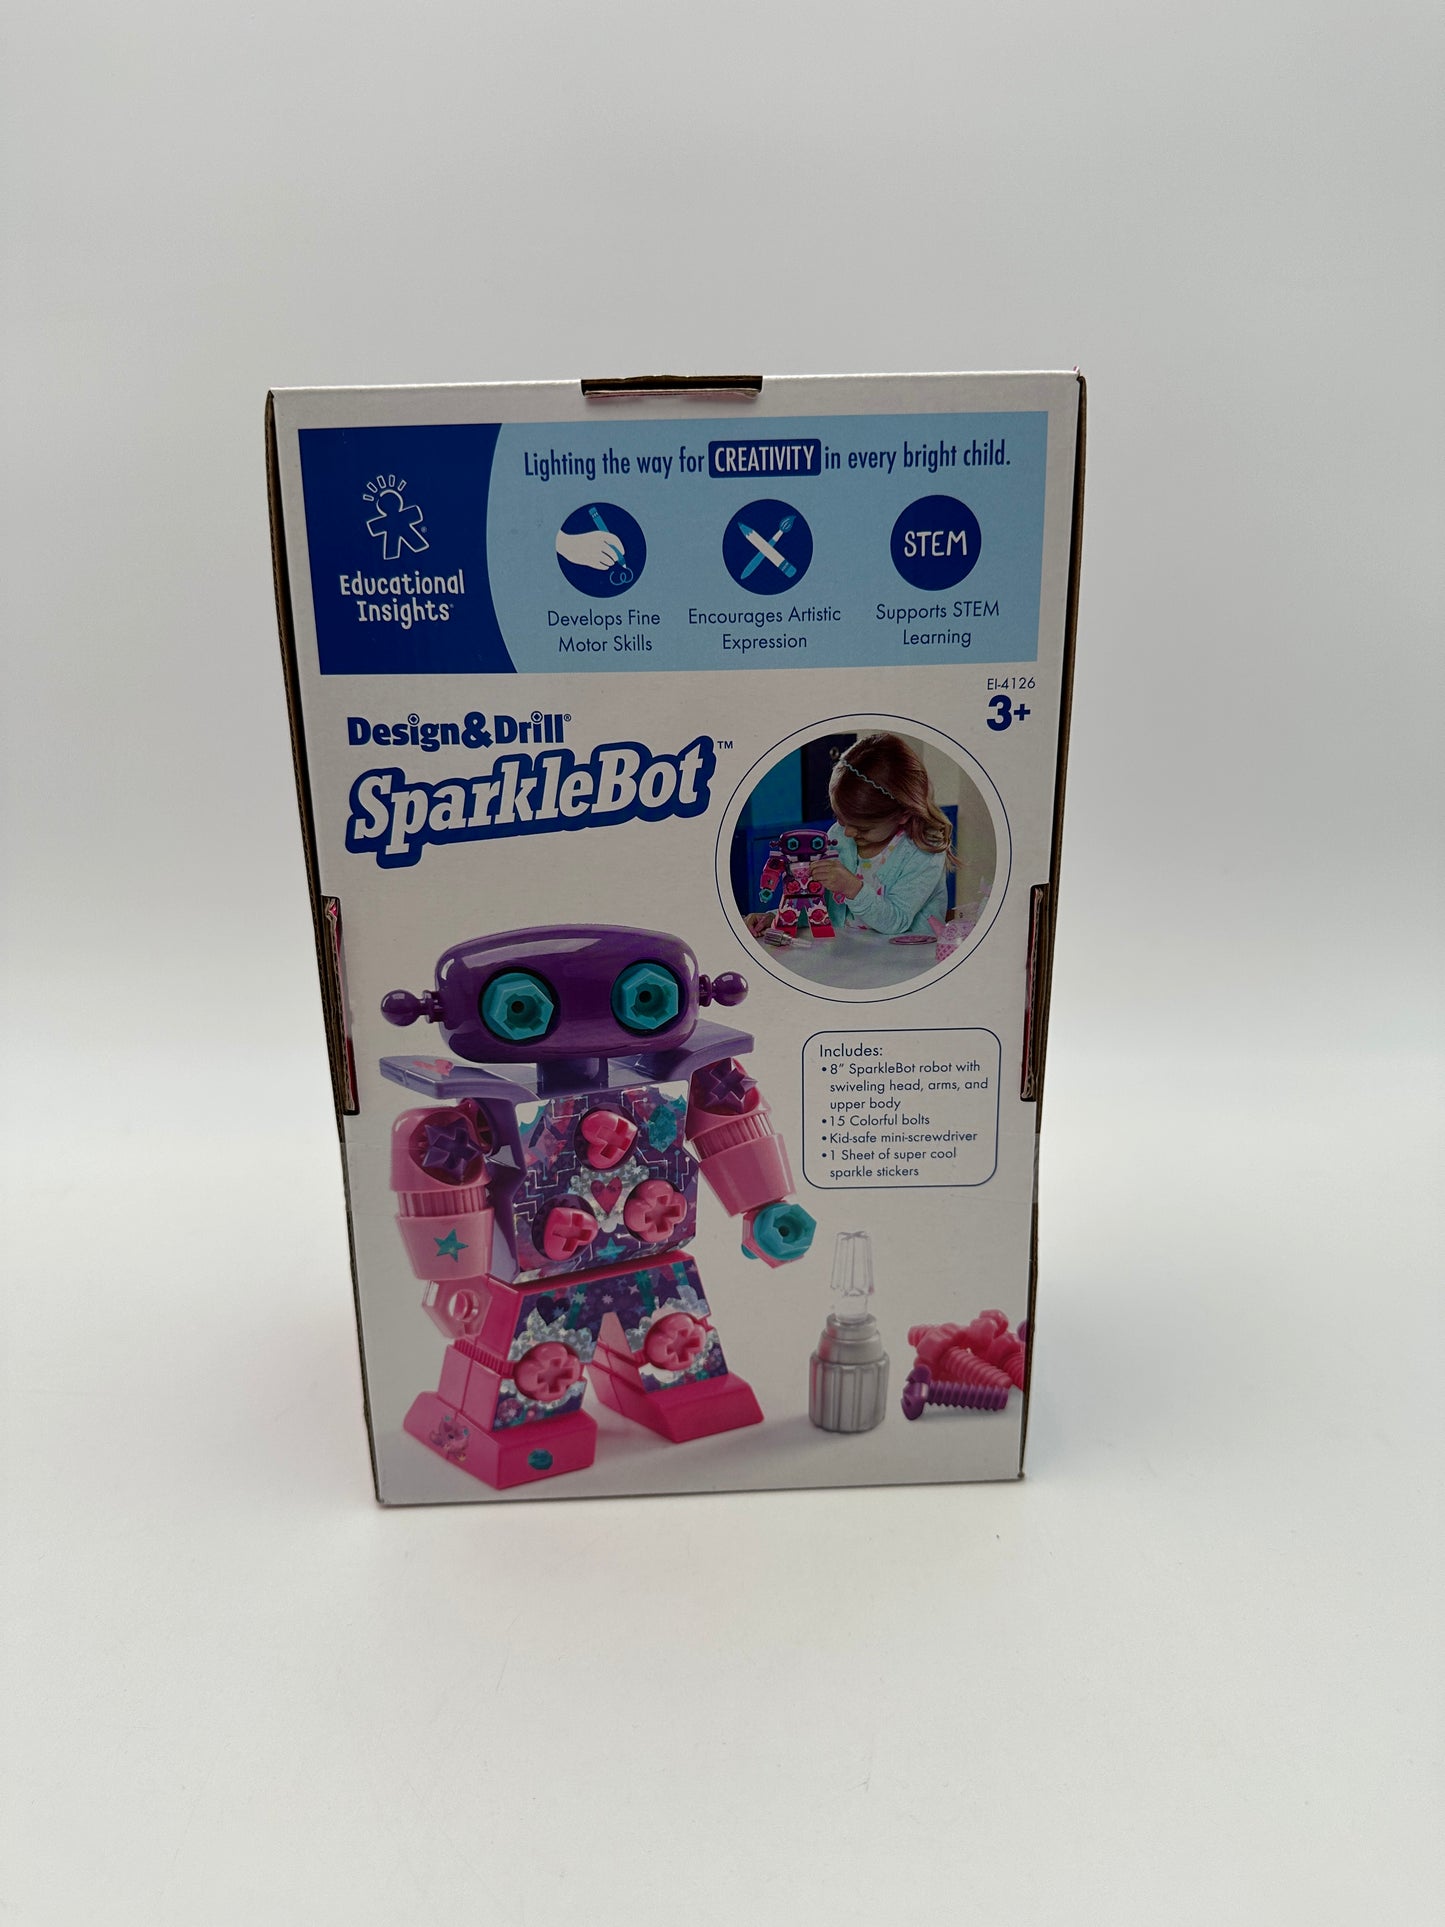 Educational Insights Purple & Pink Design & Drill SparkleBot, new in box